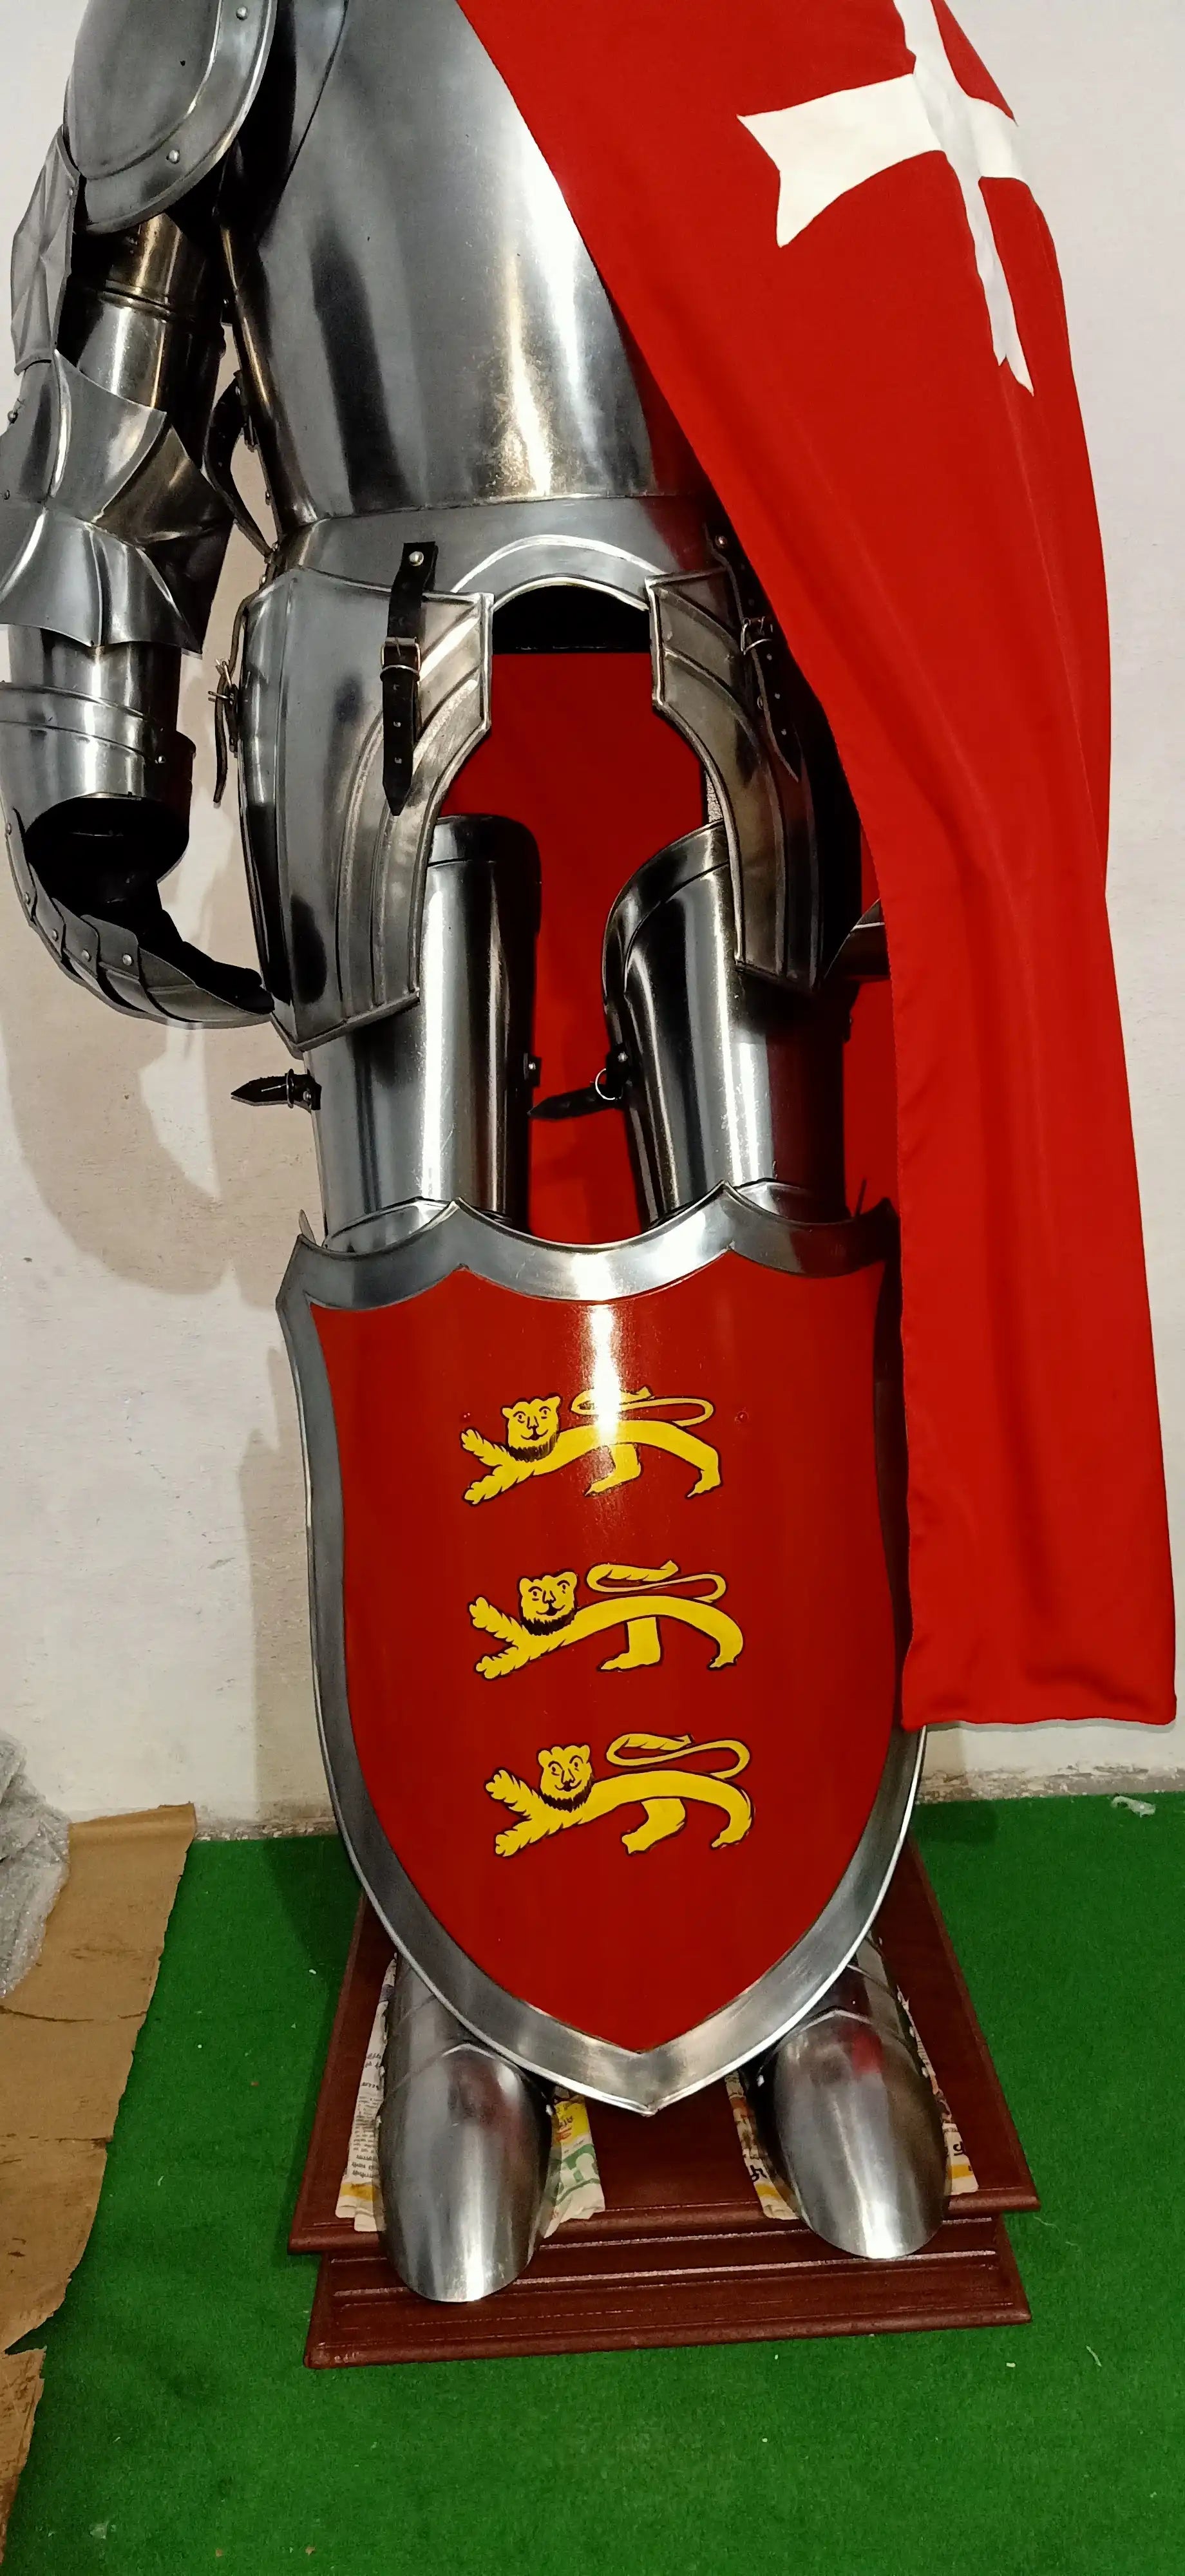 Medieval Knight Full Body Wearable Armor & Shield Costume Figure Collectibles With Wooden Stand